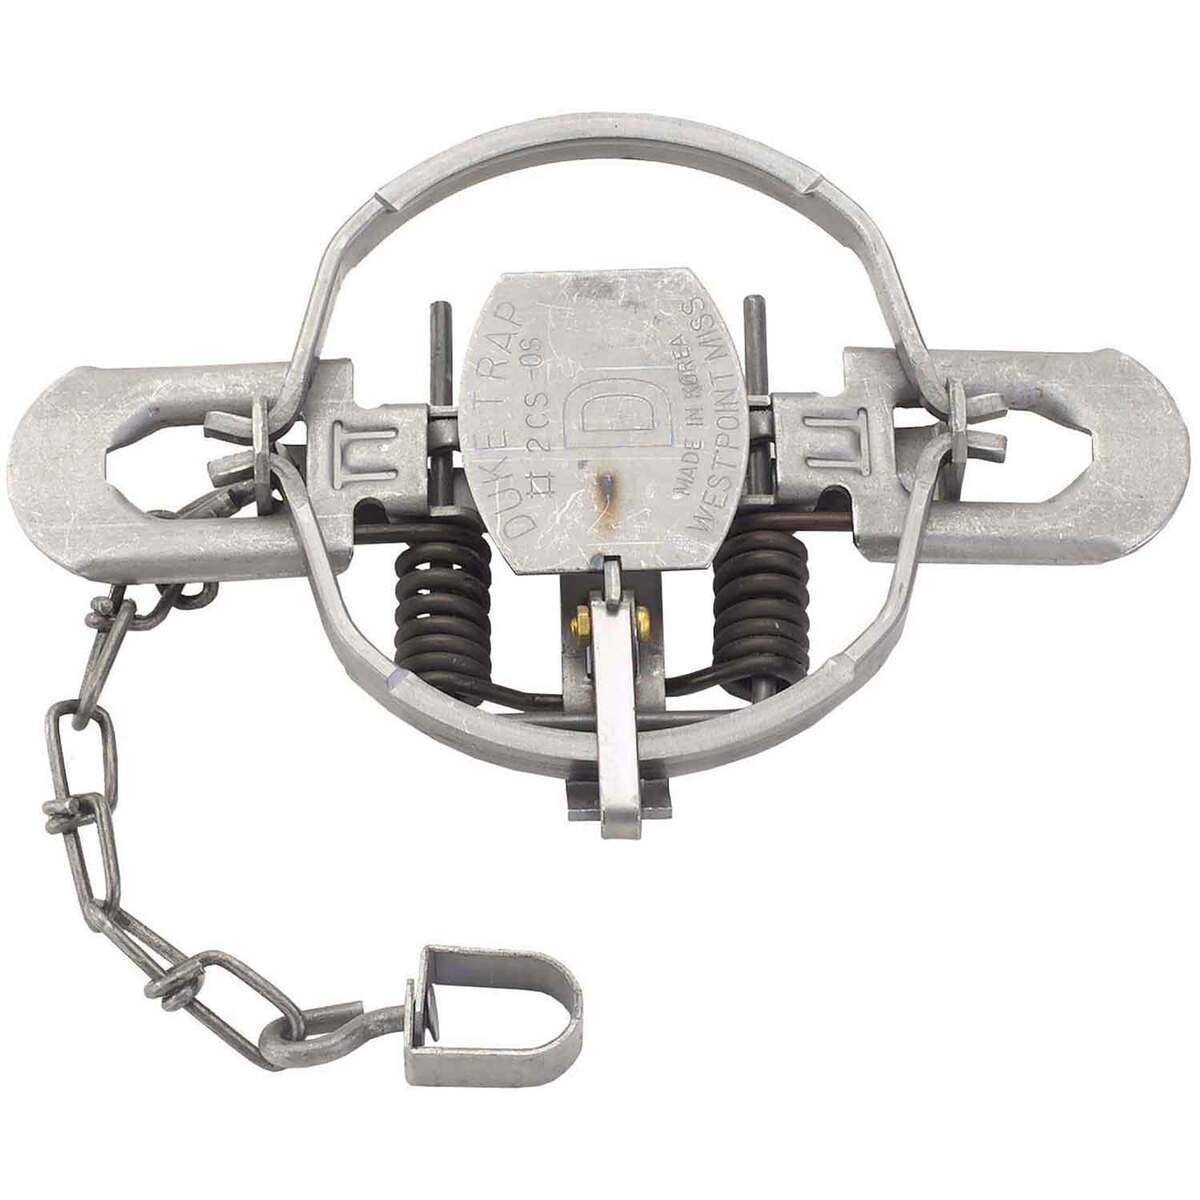 Duke Coil Spring Trap Offset Jaw No. 2